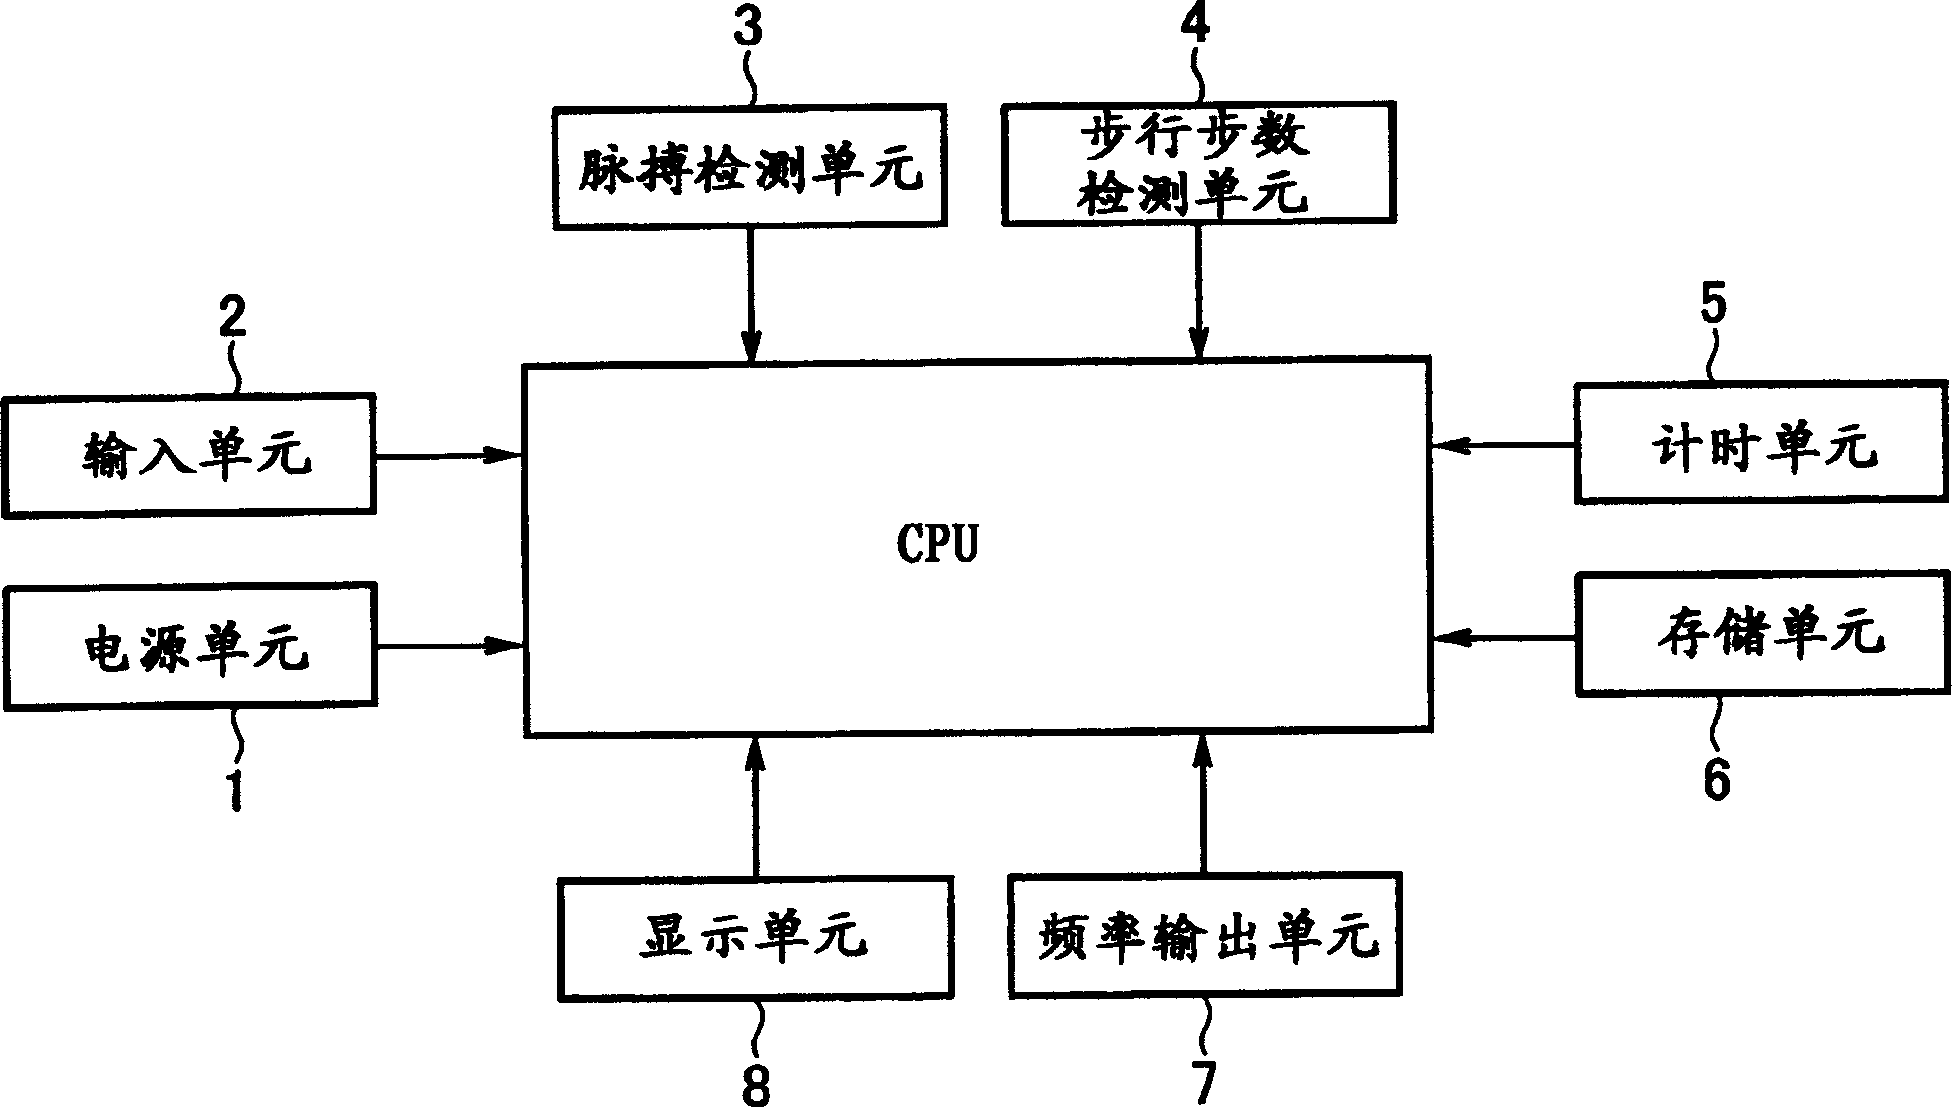 Supporting system for walk